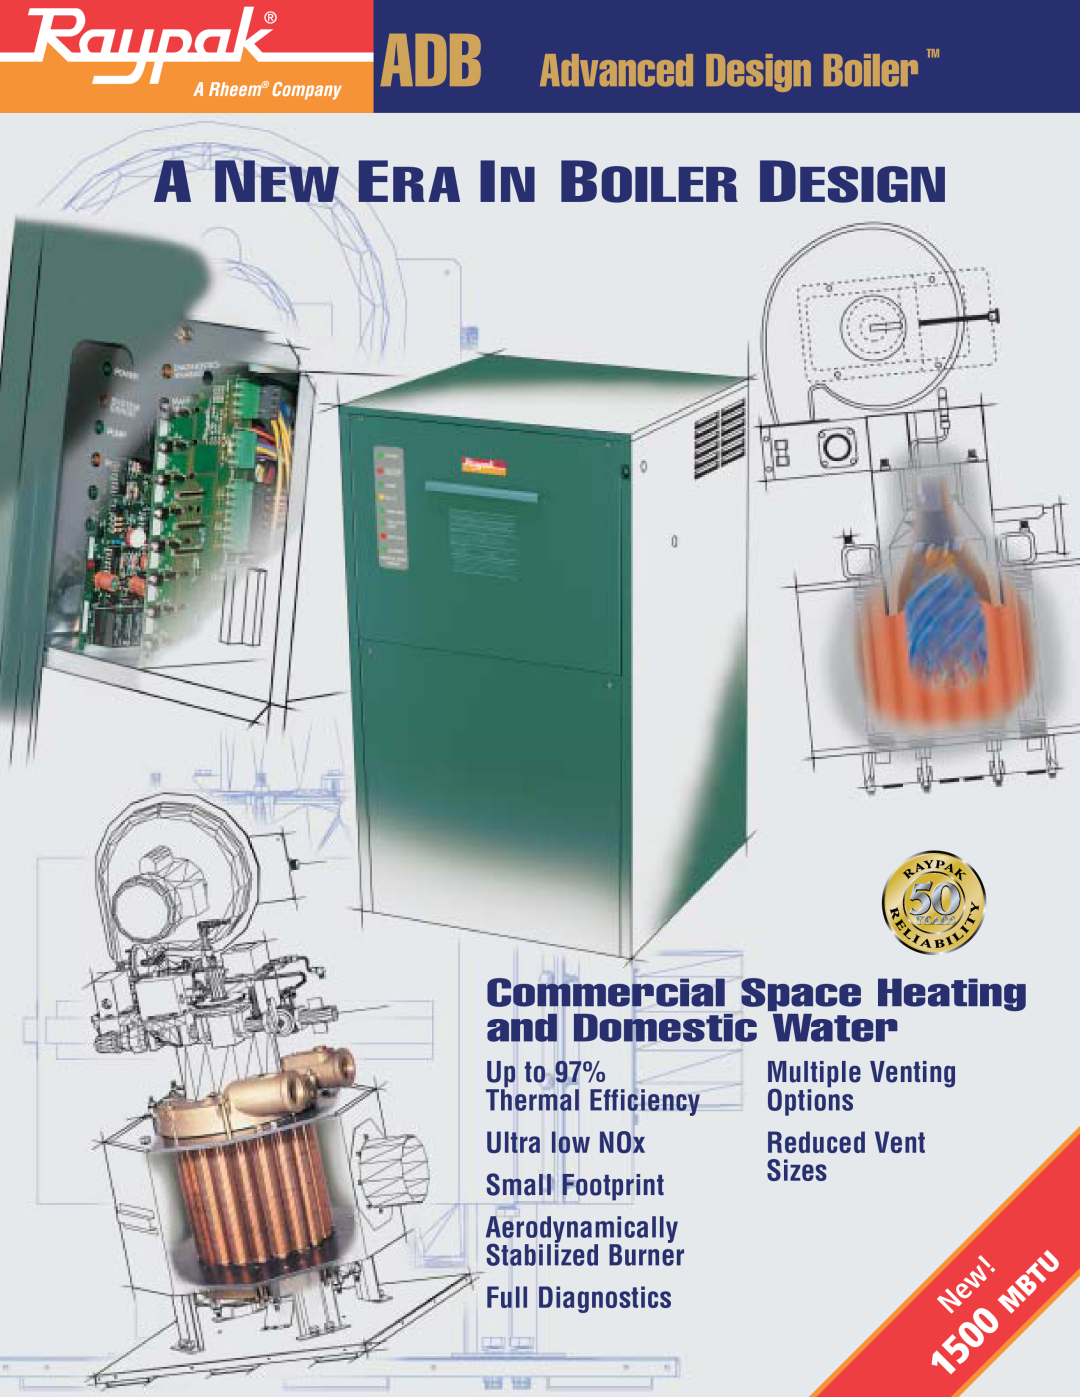 Raypak Commercial Space Heating and Domestic Water manual Anew Era In Boiler Design, ADB Advanced Design Boiler TM, Sizes 